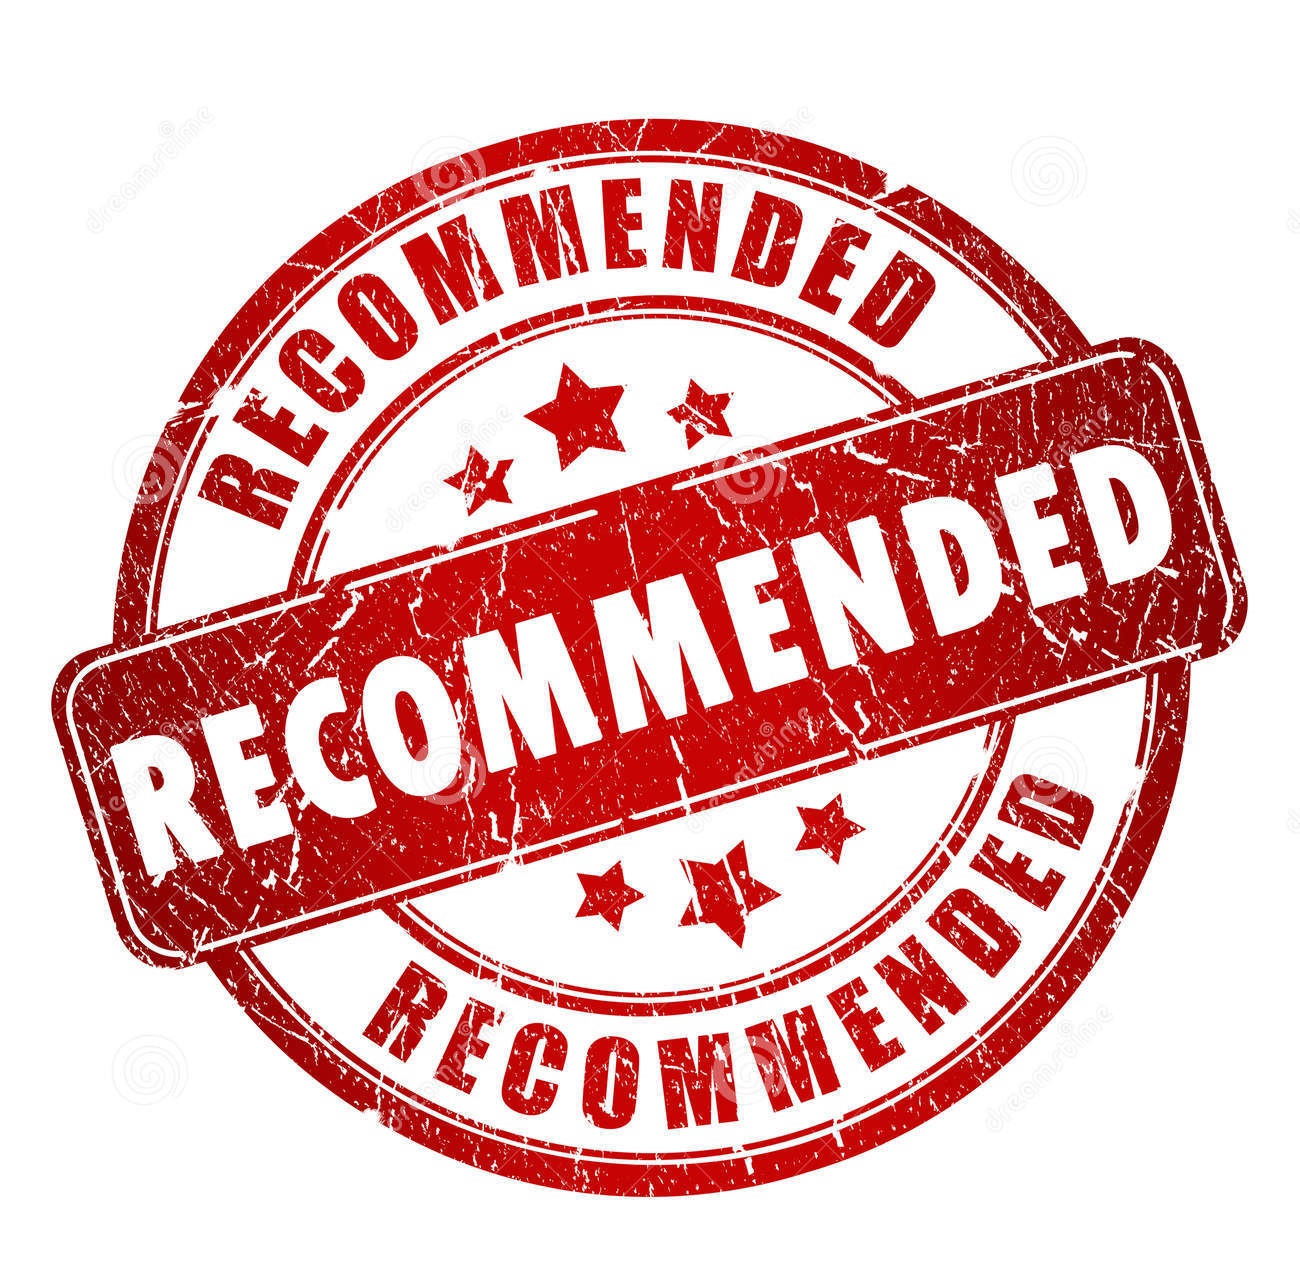 Staff Recommendations 10 18 2015